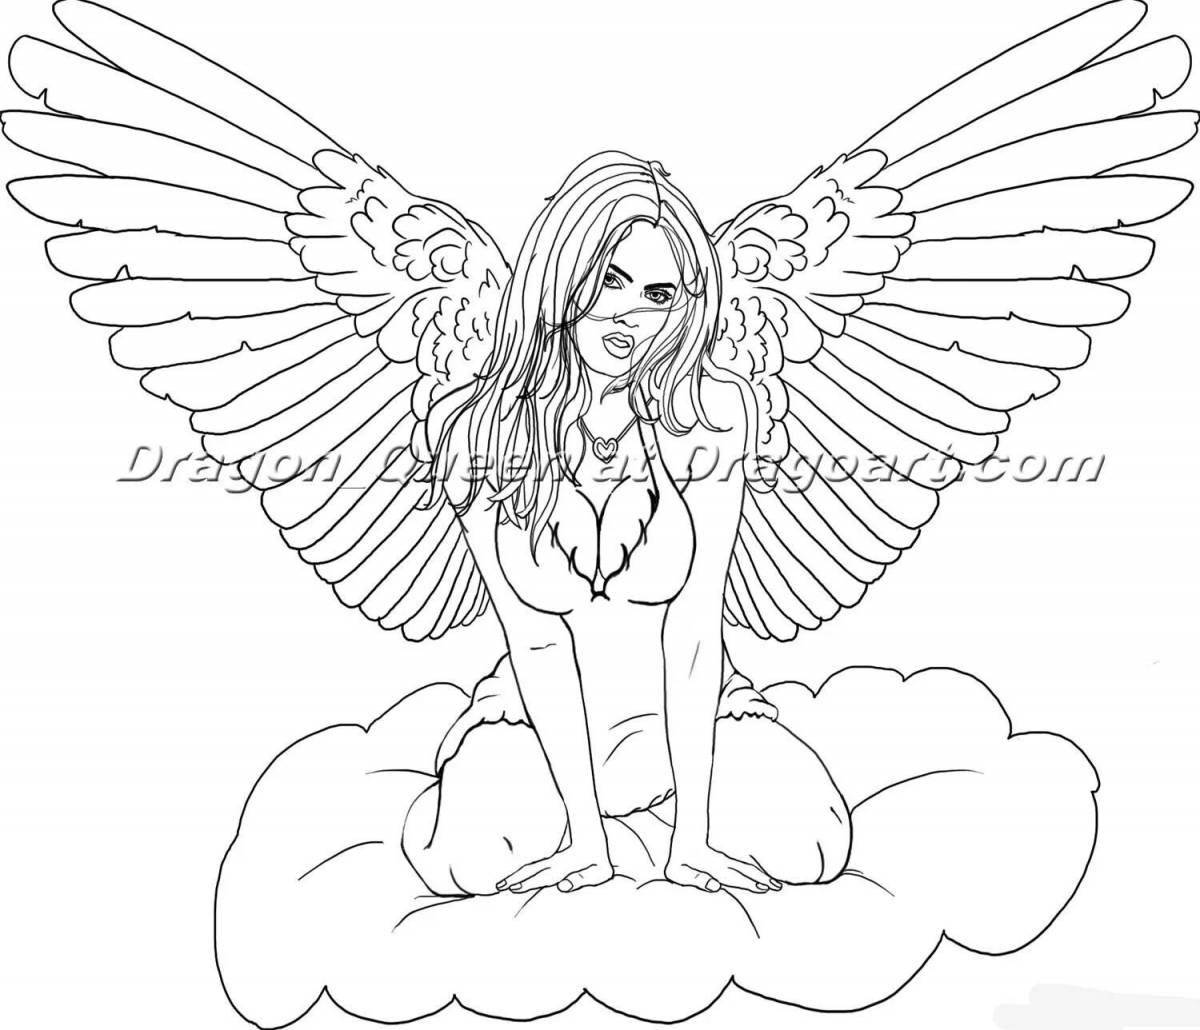 Glowing coloring pages angels with beautiful wings